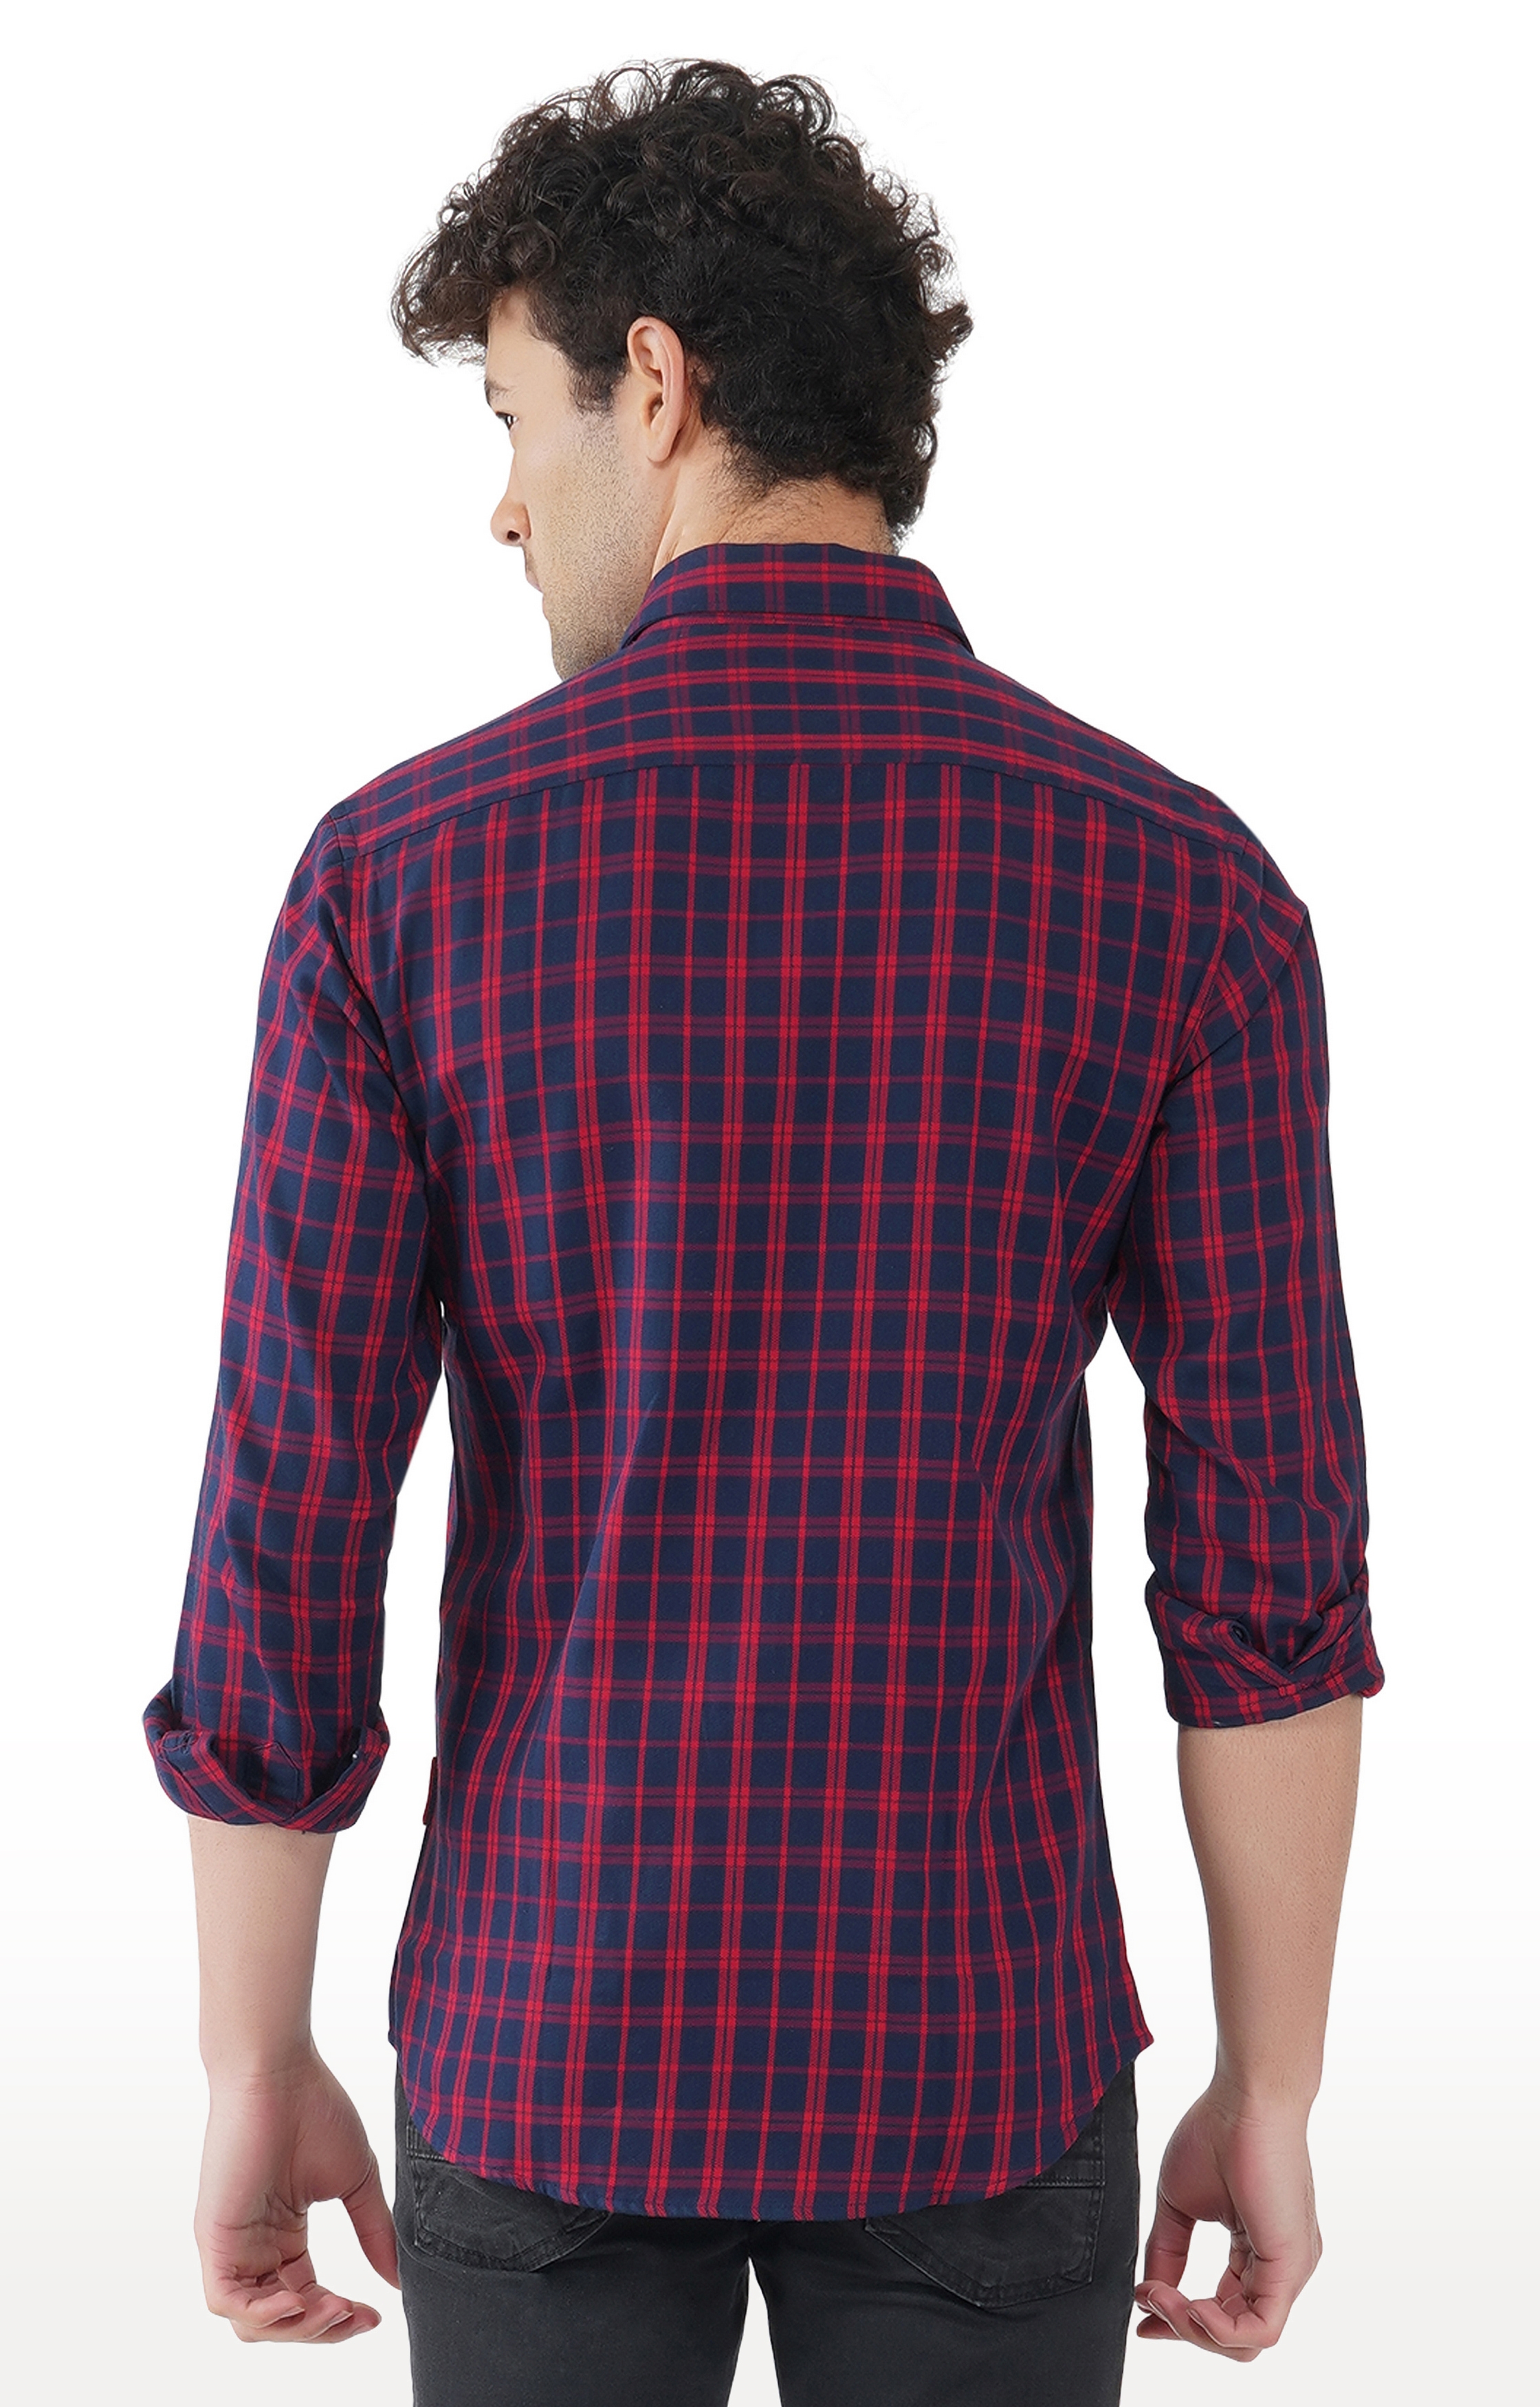 OUTLAWS | Outlaws 7041 - 100% Cotton Multi Color Check Smart Fit Shirt 5